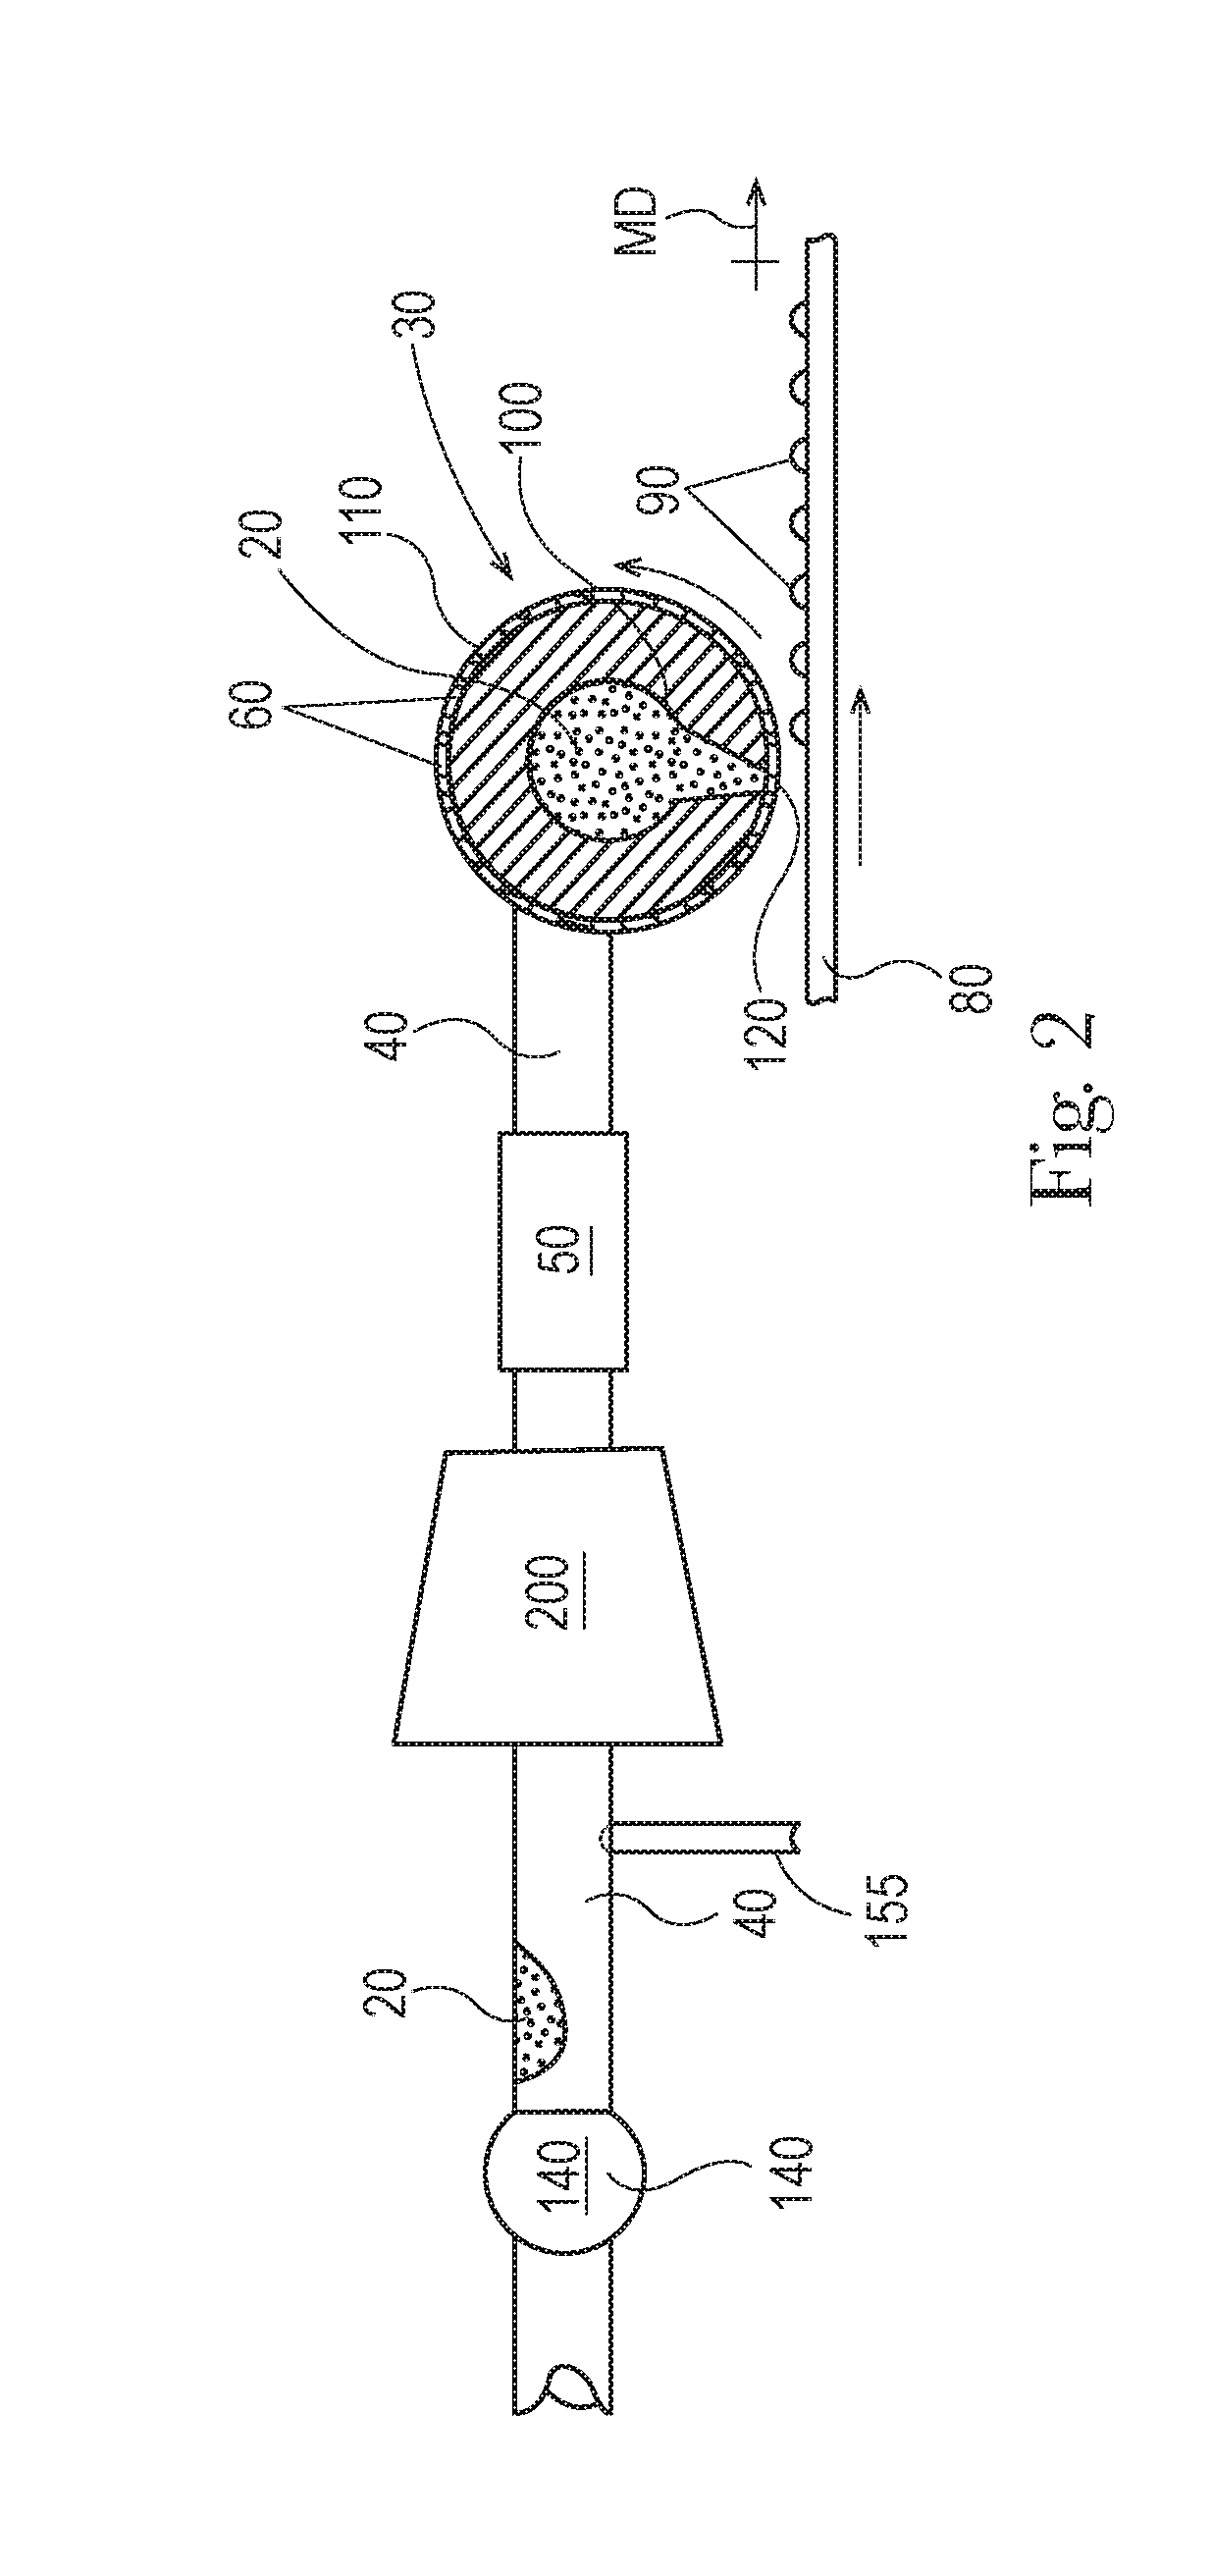 Apparatus and process for forming particles